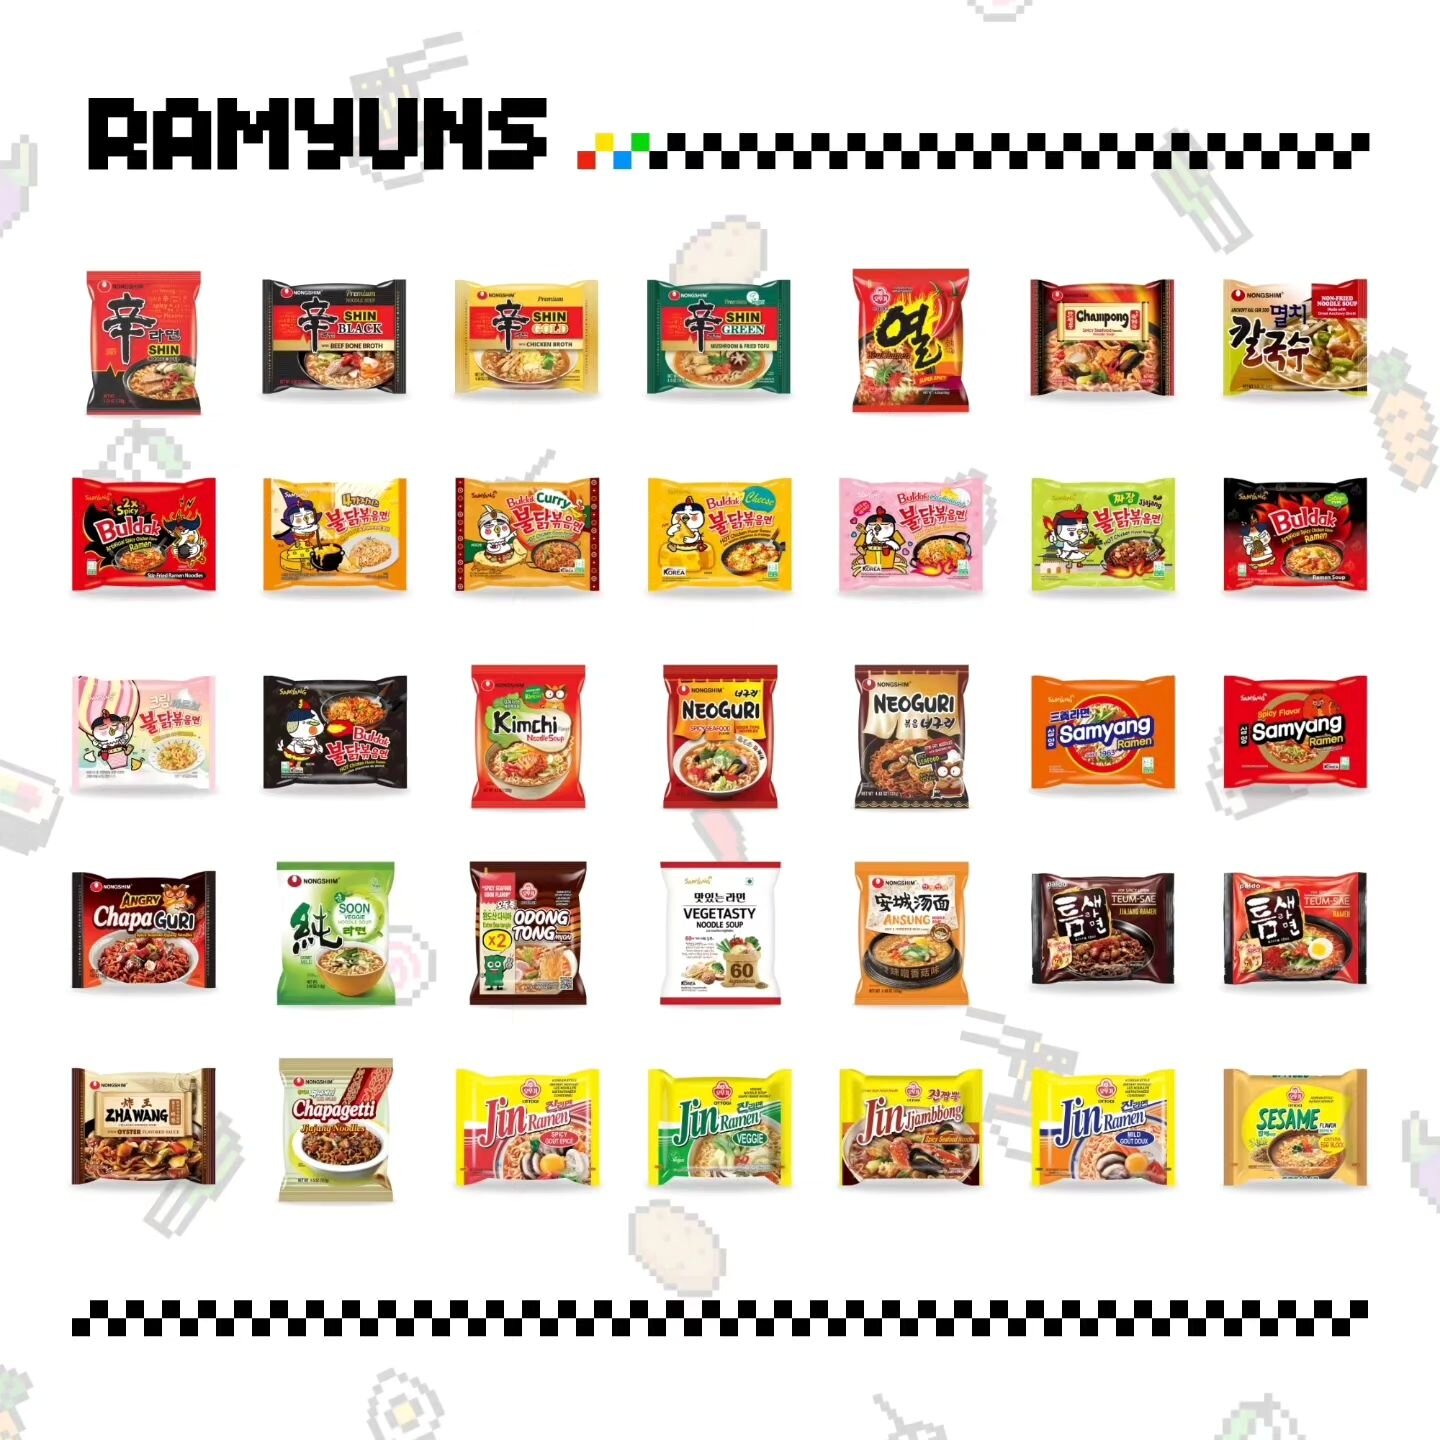 Here are our ramyun and topping lists! We will be soft opening on next week. We'd love for you to come and enjoy some delicious Korean ramyun with us!